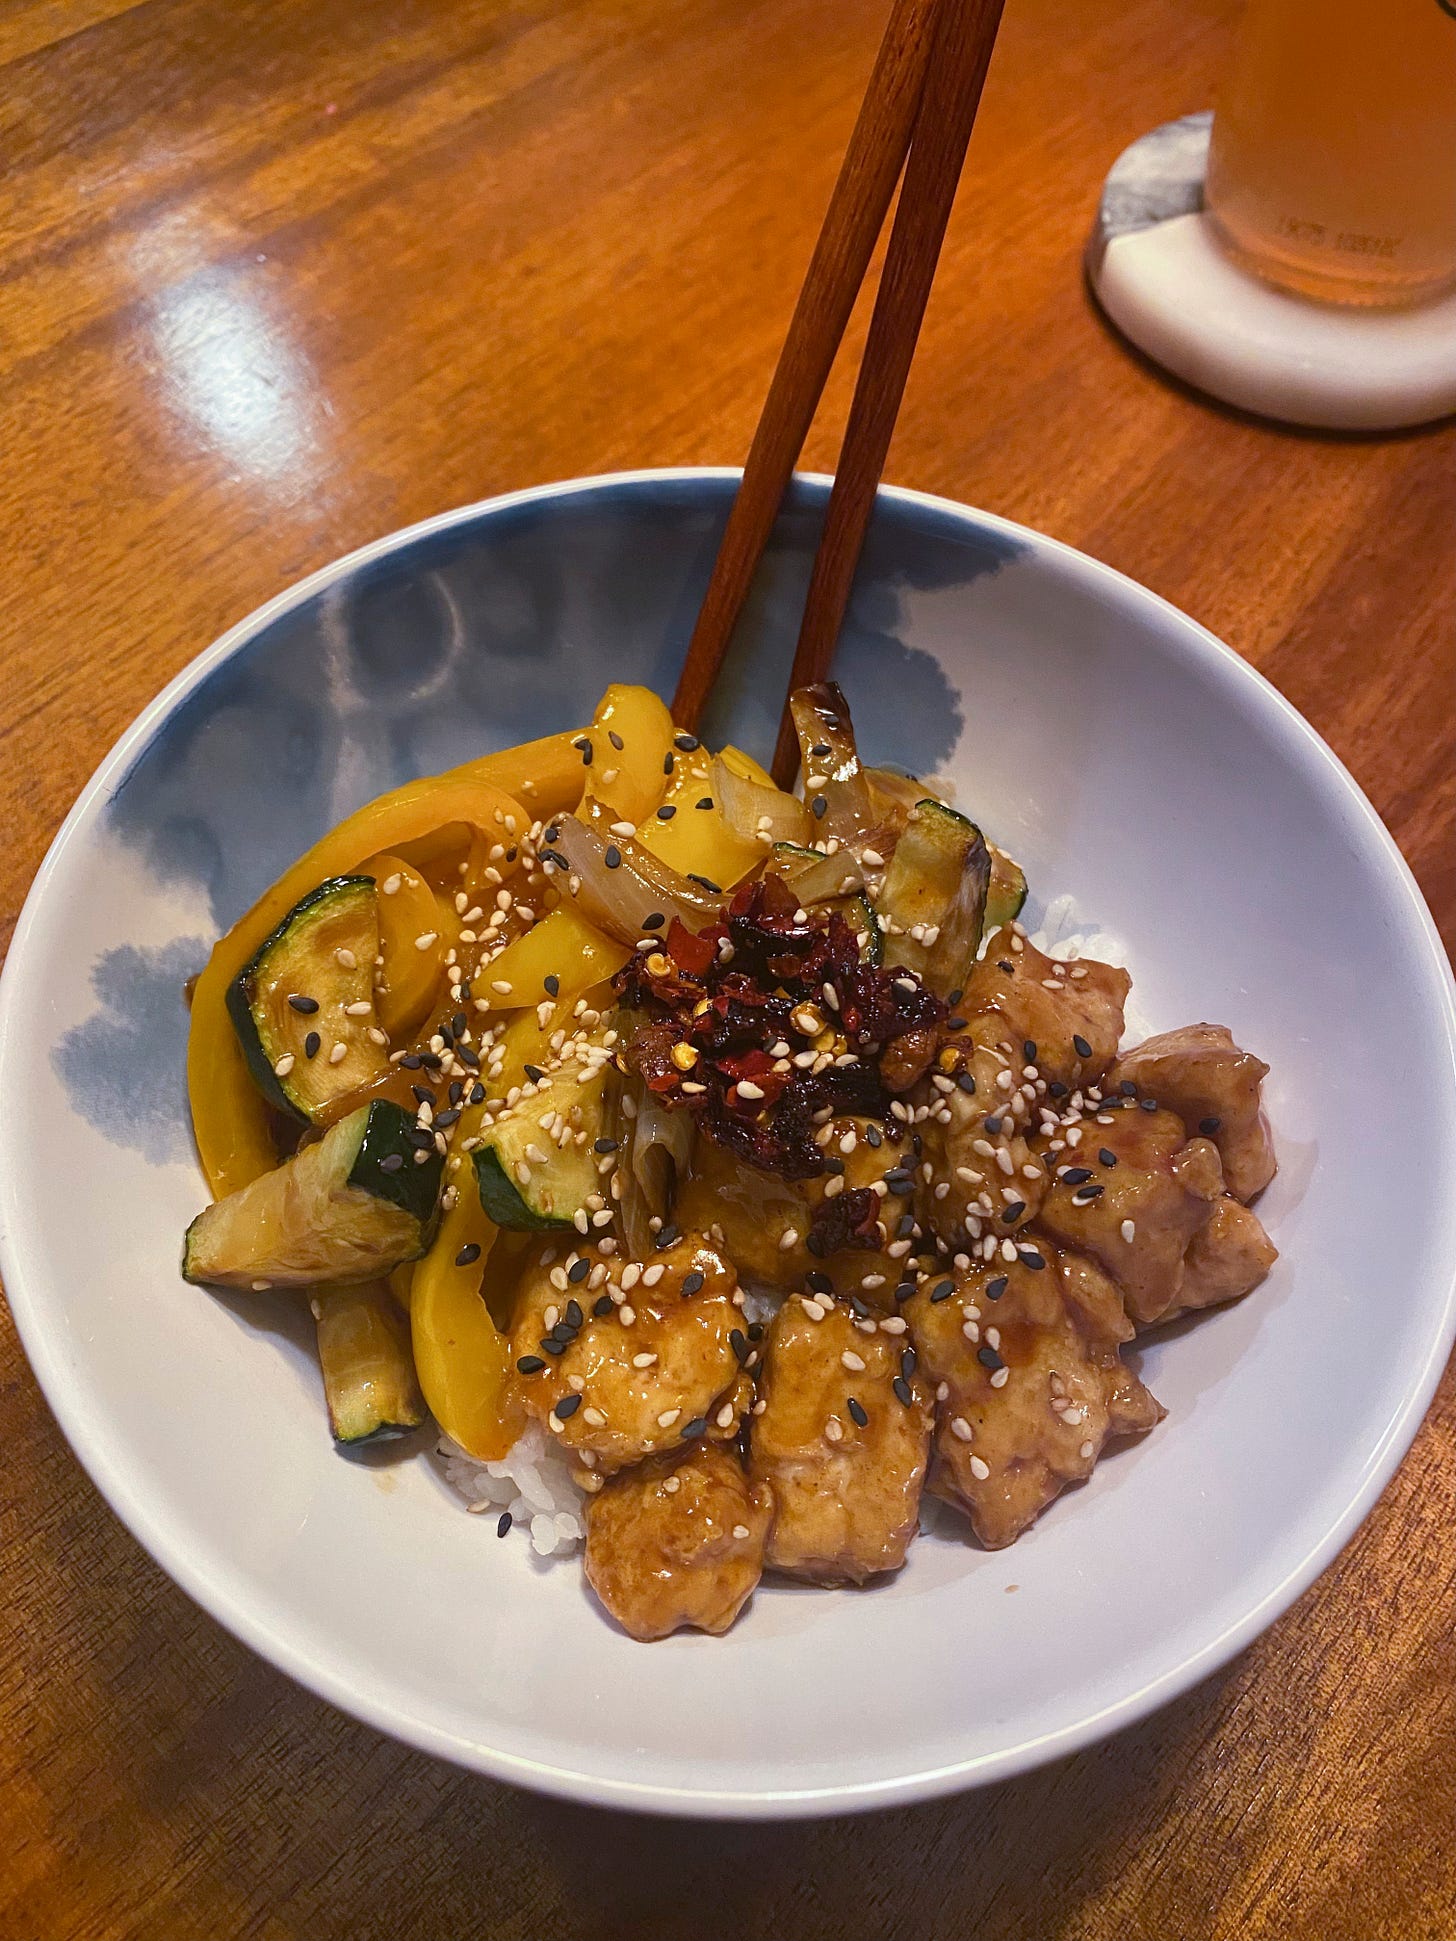 In a white bowl with wooden chopsticks sticking out at the back, white rice is topped with pieces of tofu and stir fried zucchini and pepper in teriyaki sauce. On top are black and white sesame seeds and chili crisp.